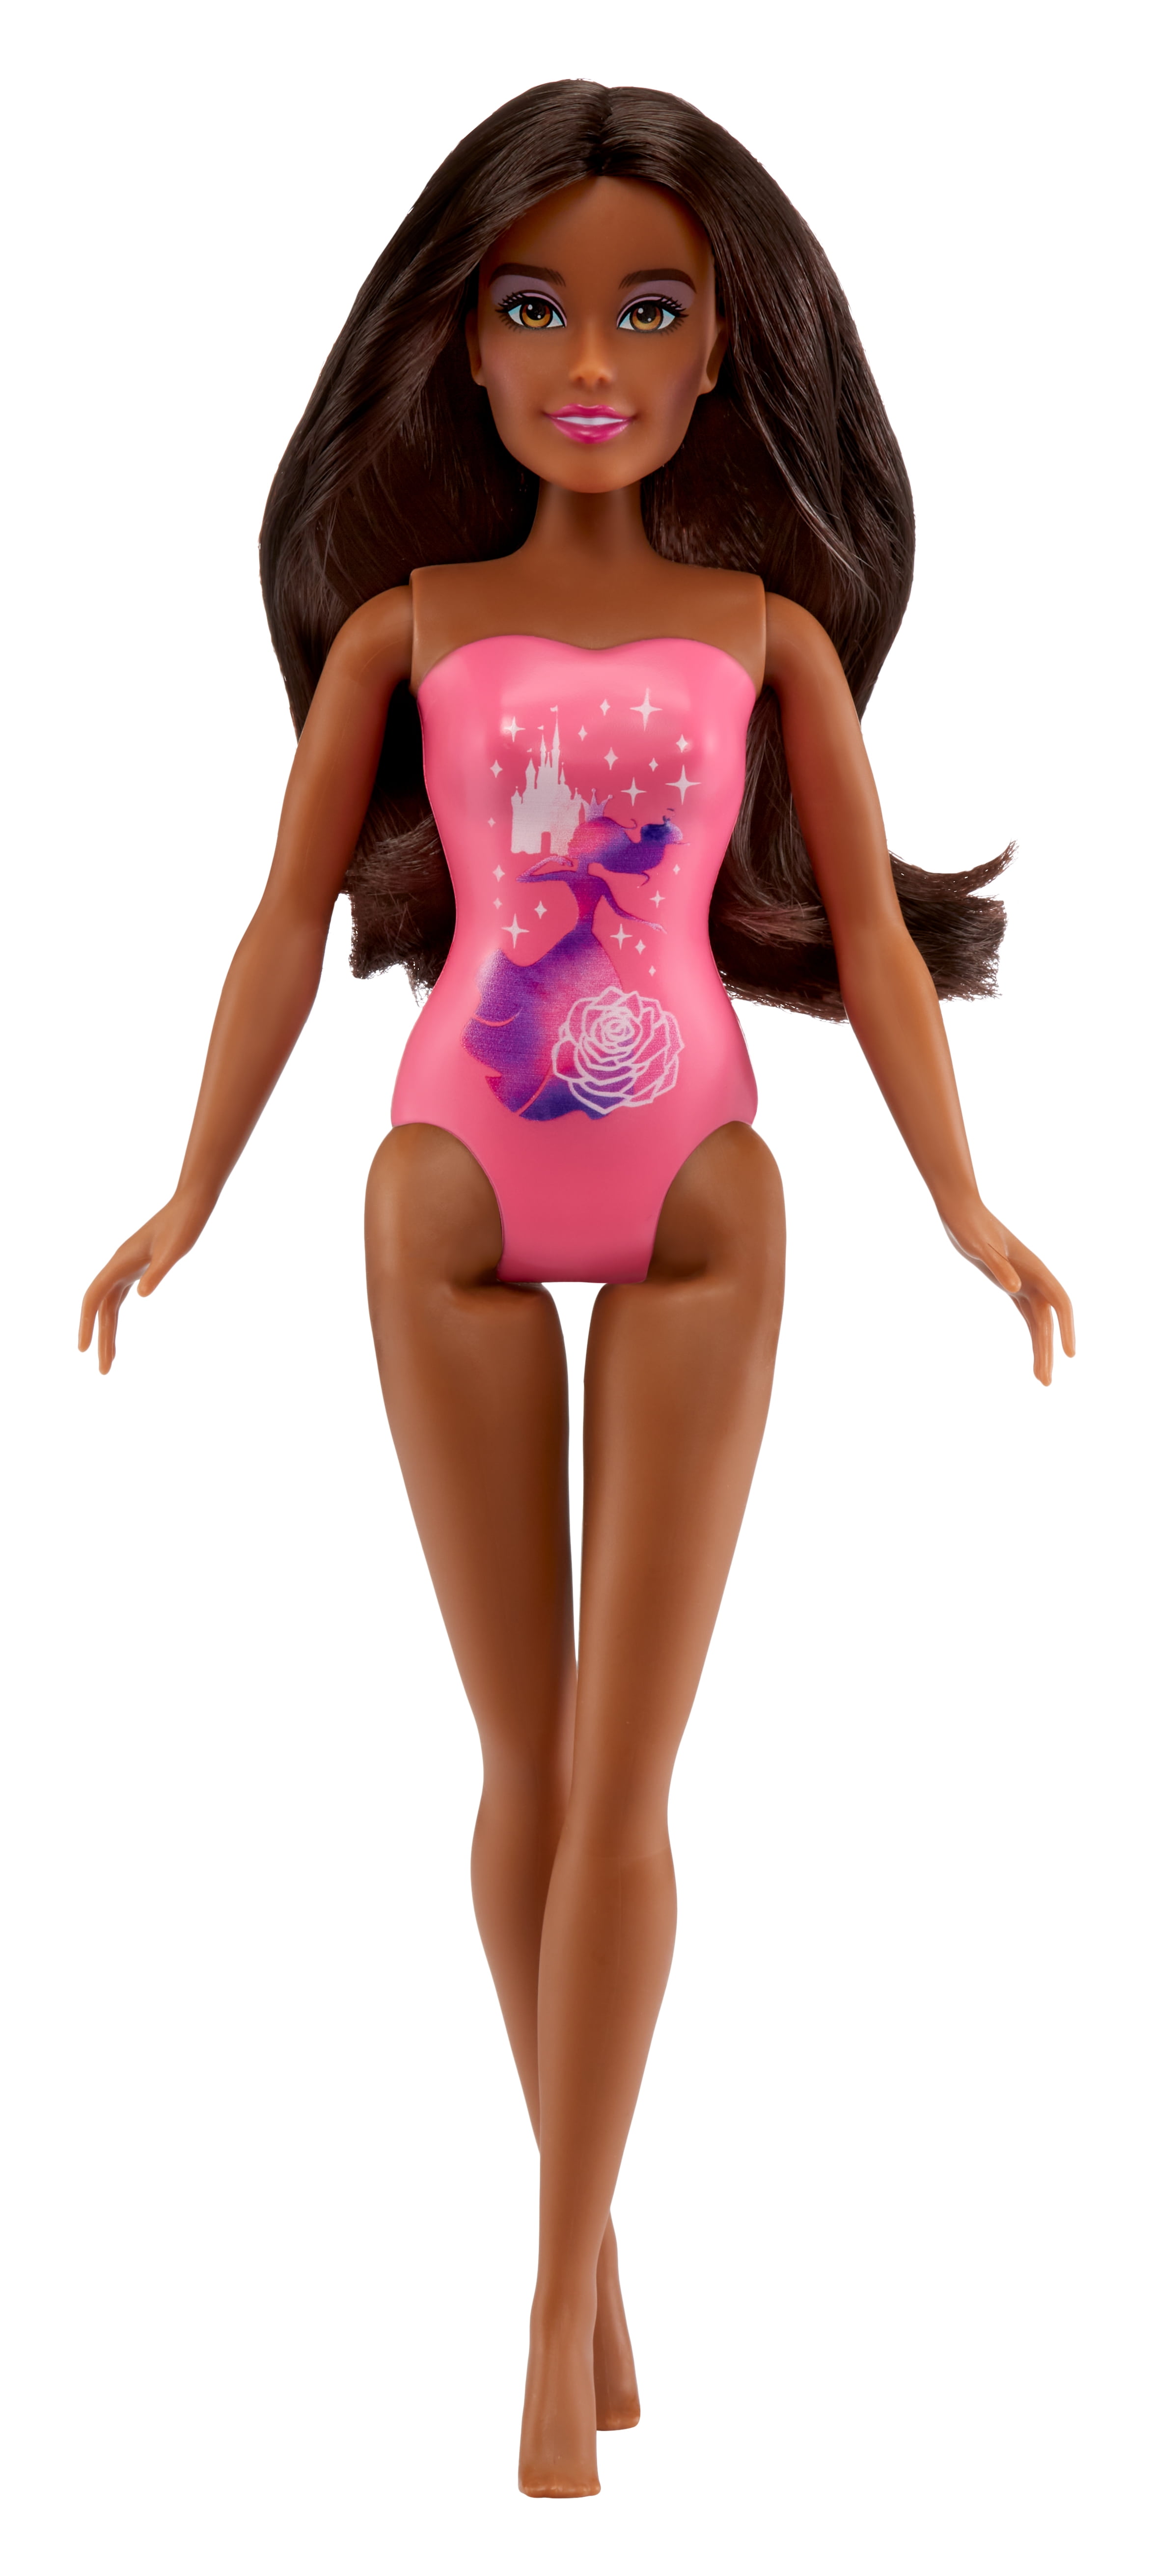 Barbie Floral Swimsuit Water Play Doll Girl Toys Birthday Christmas Gift 